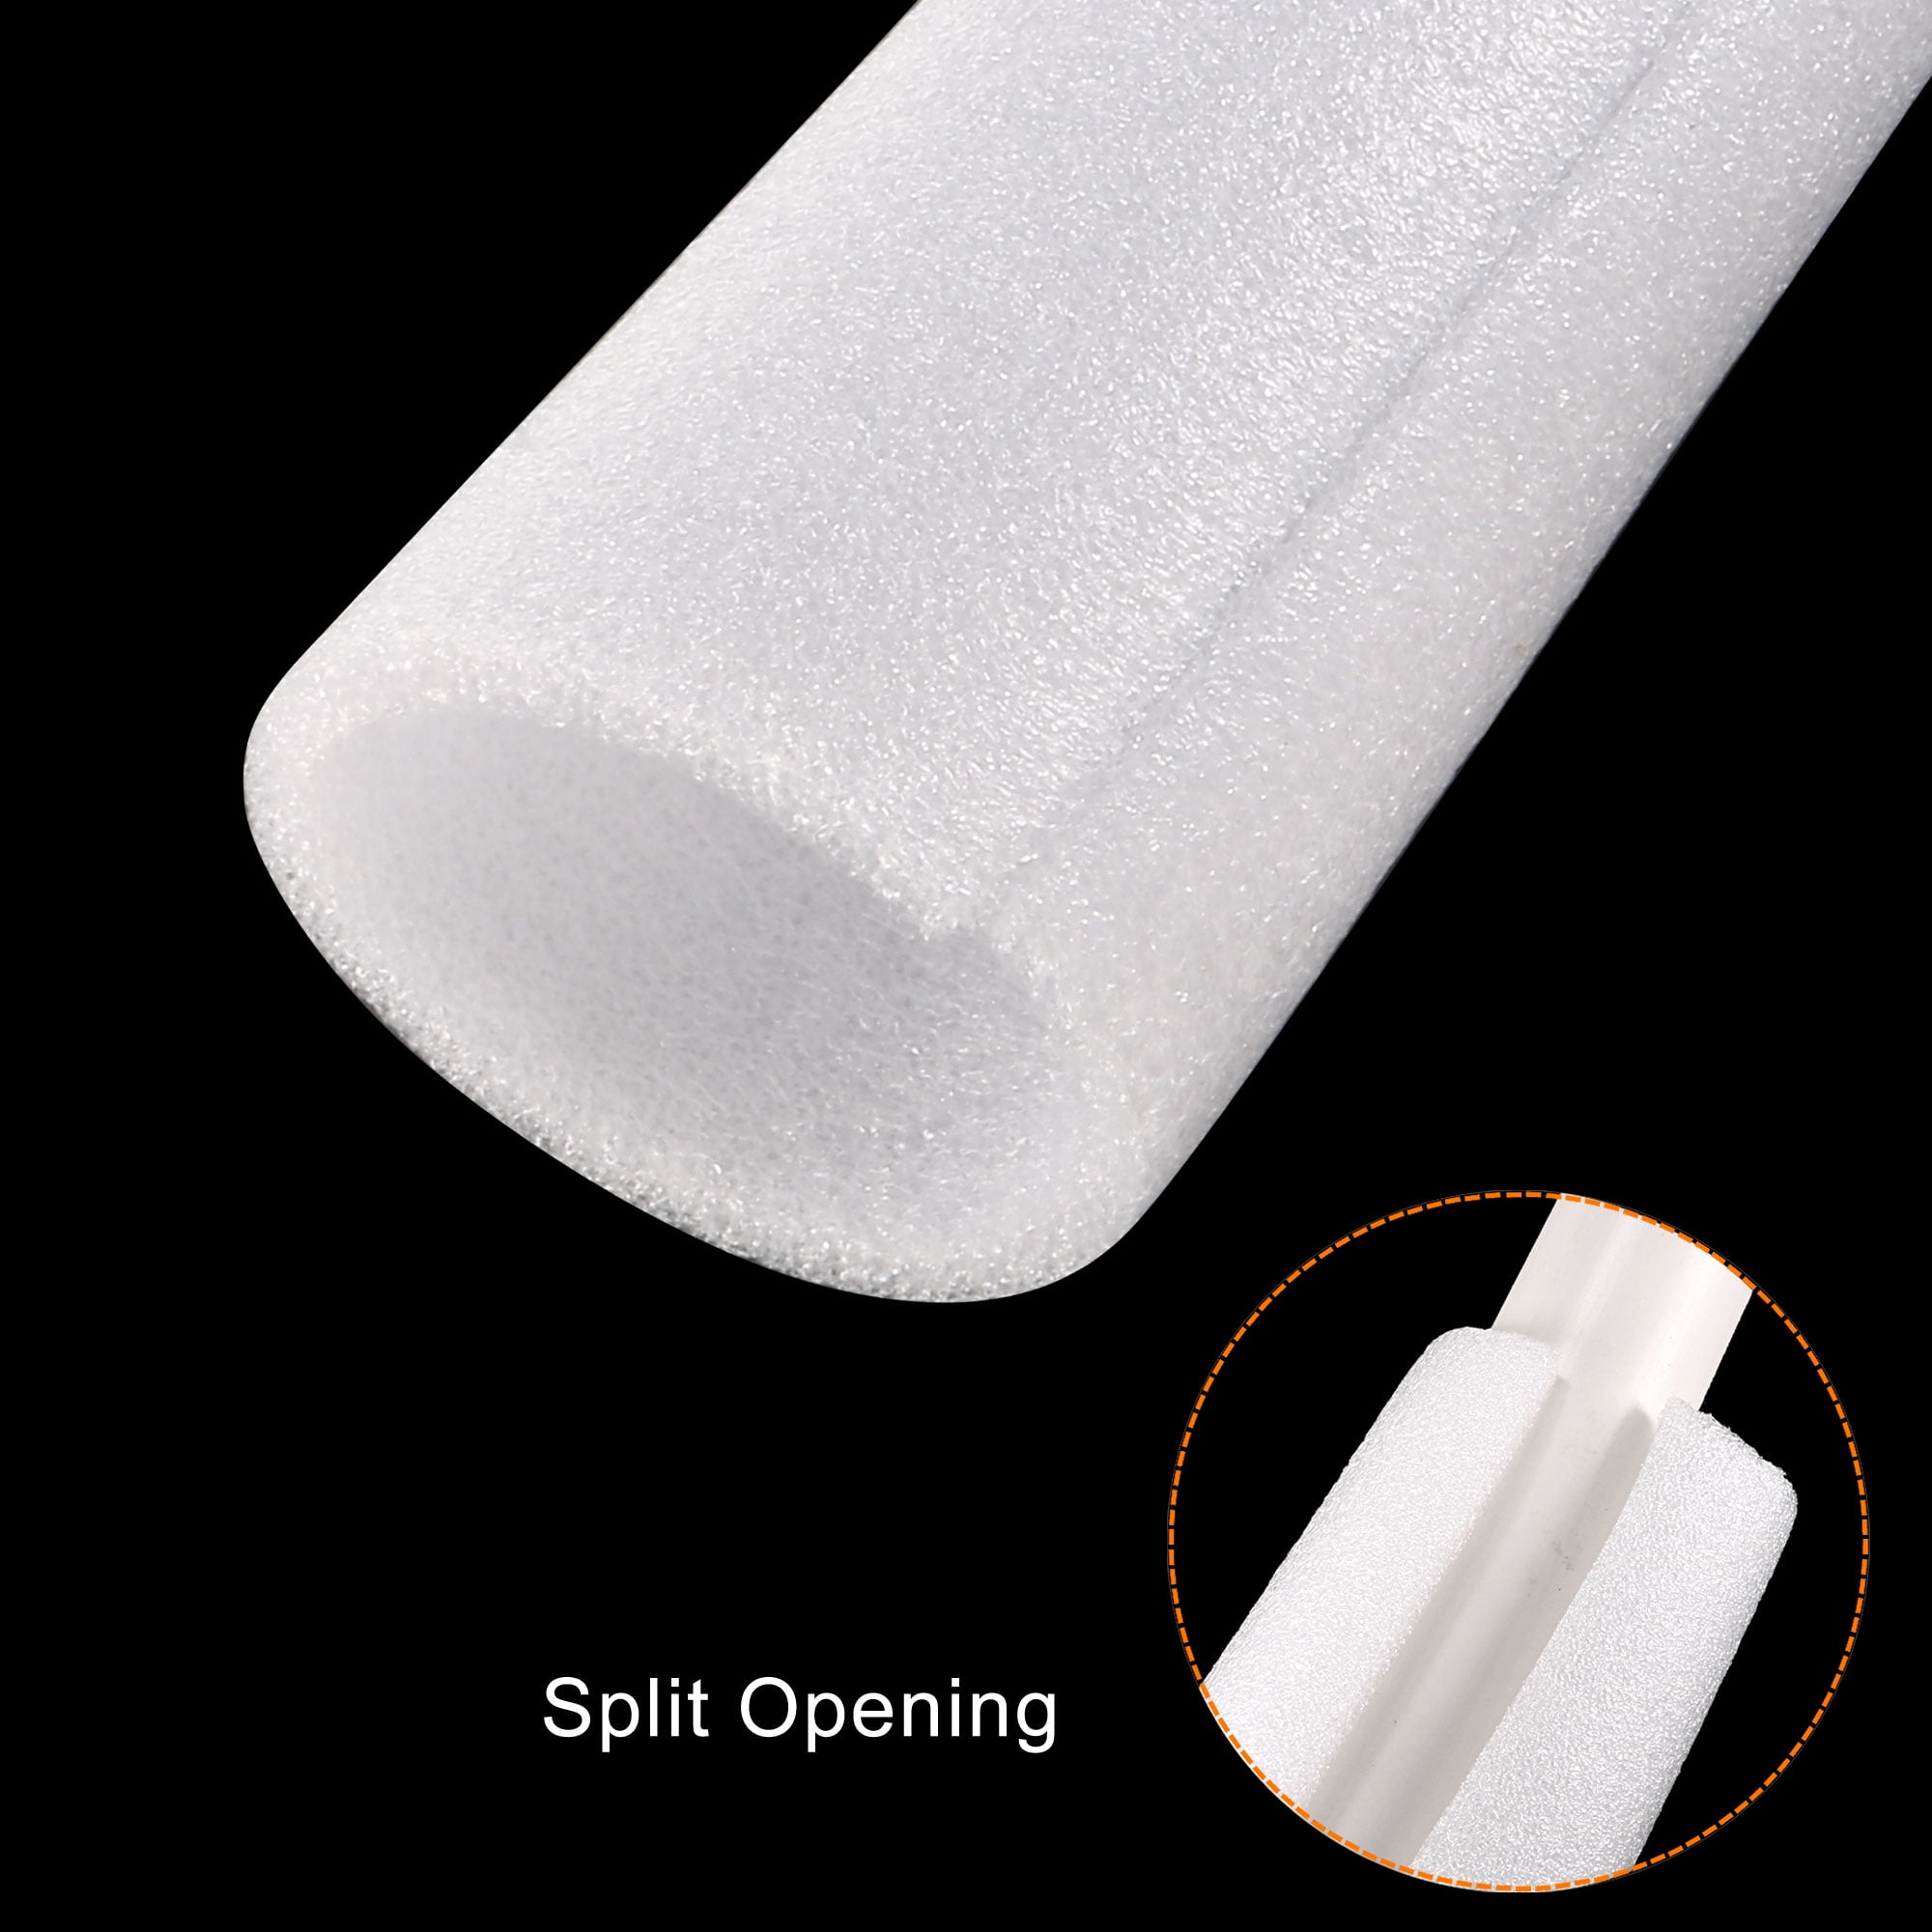 Uxcell Foam Tube Sponge Protective Sleeve Length 2.75 Inch for Pipe Insulation, 4 - Walmart.com